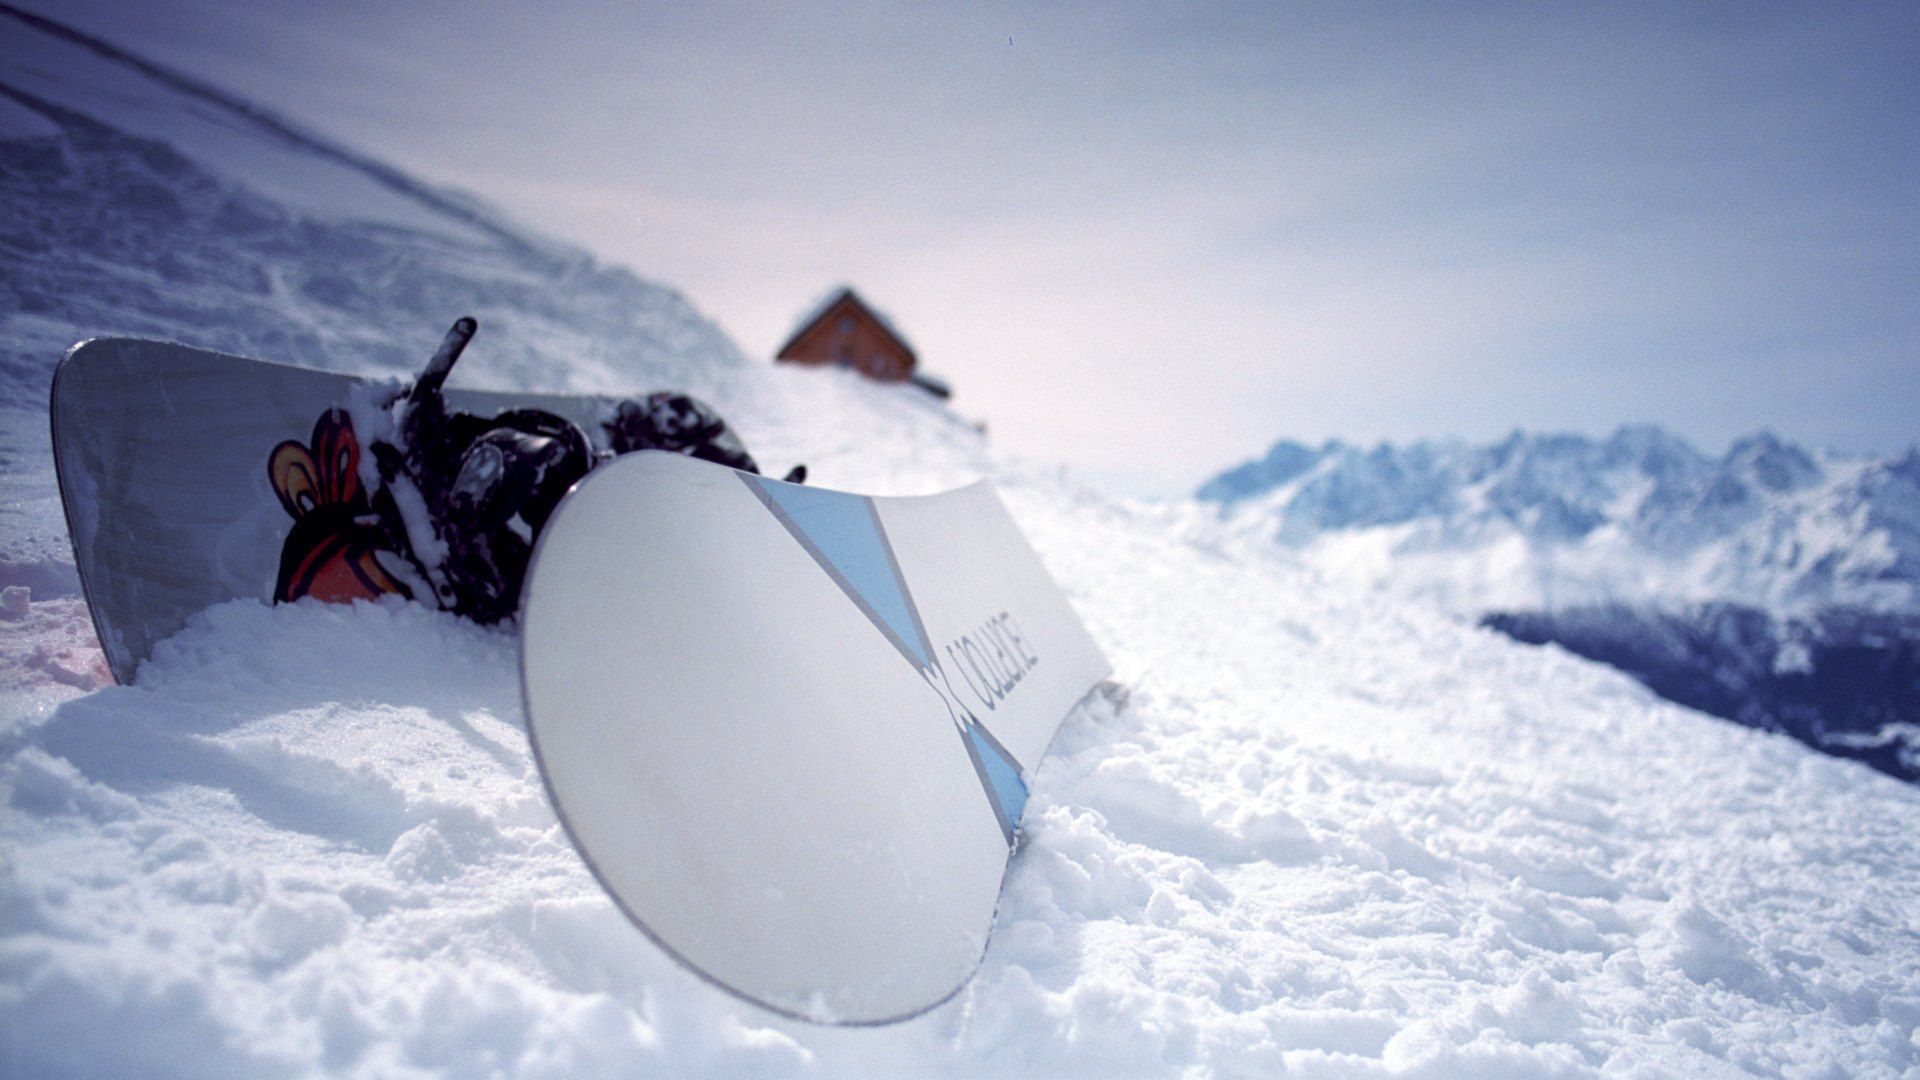 Ready for Snowboarding Wallpapers :: HD Wallpapers